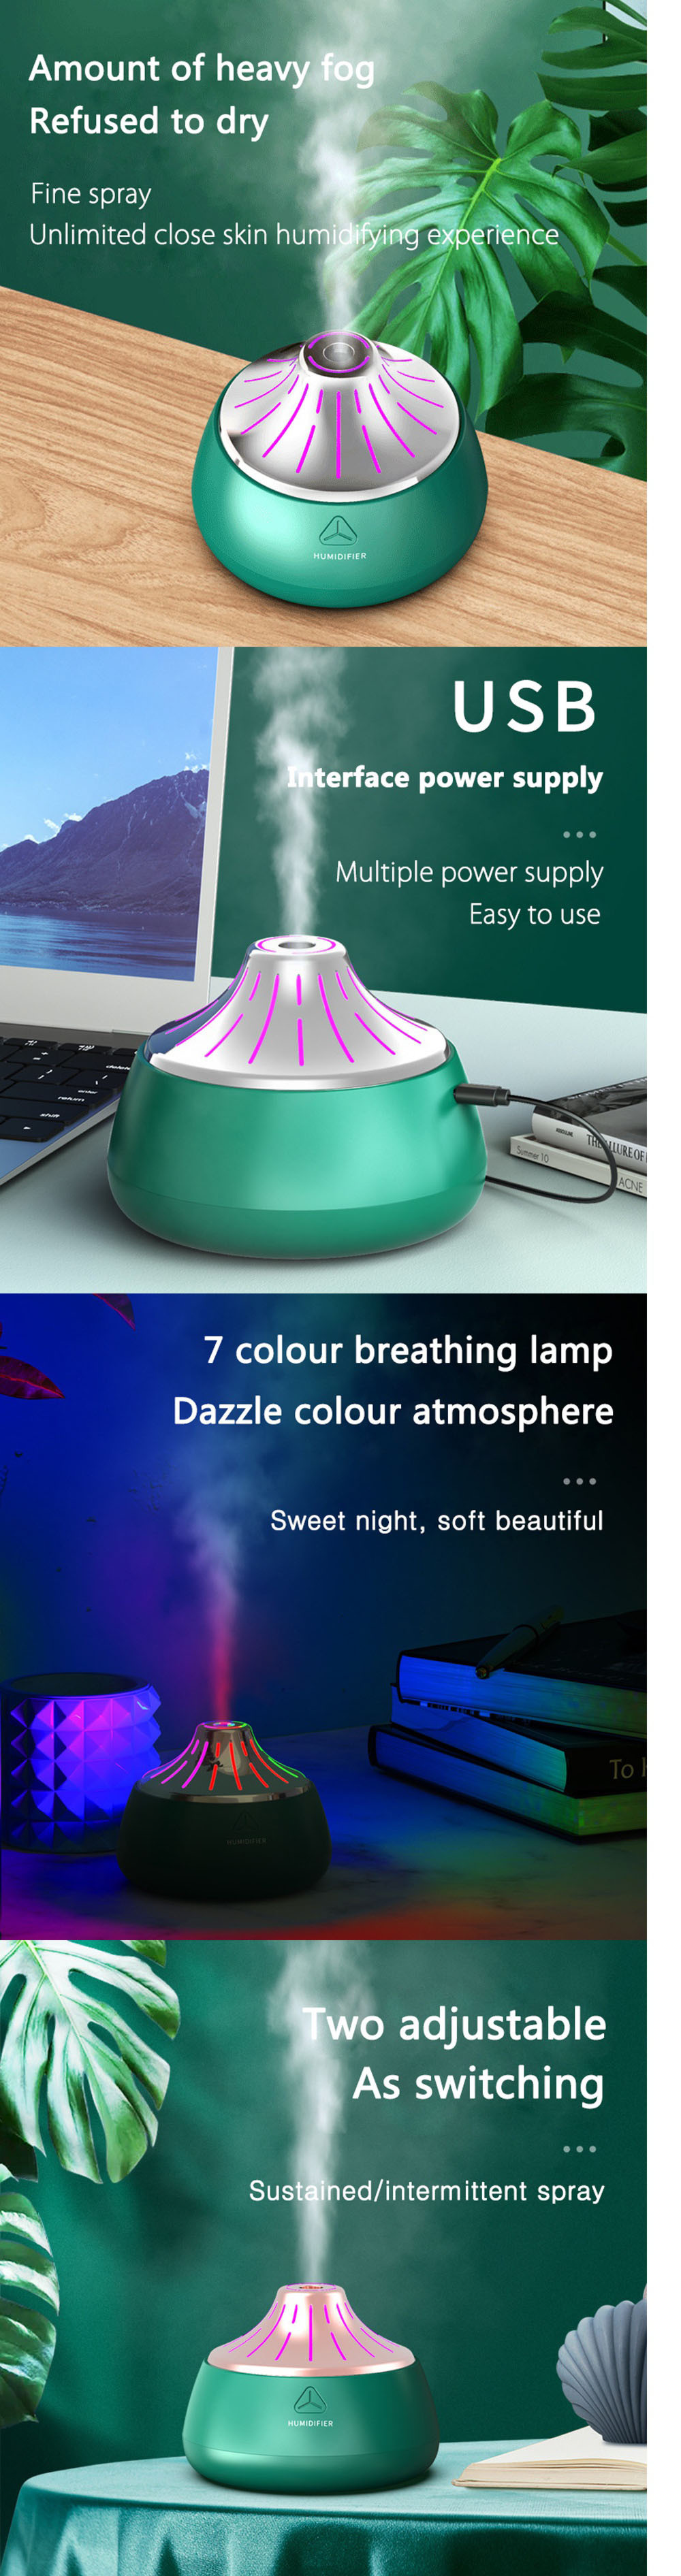 X9-Mini-USB-Air-Humidifier-with-Colorful-Lights-2W-2gear-200ml-Capacity-35-40mlh-Low-Noise-for-Home--1729719-2